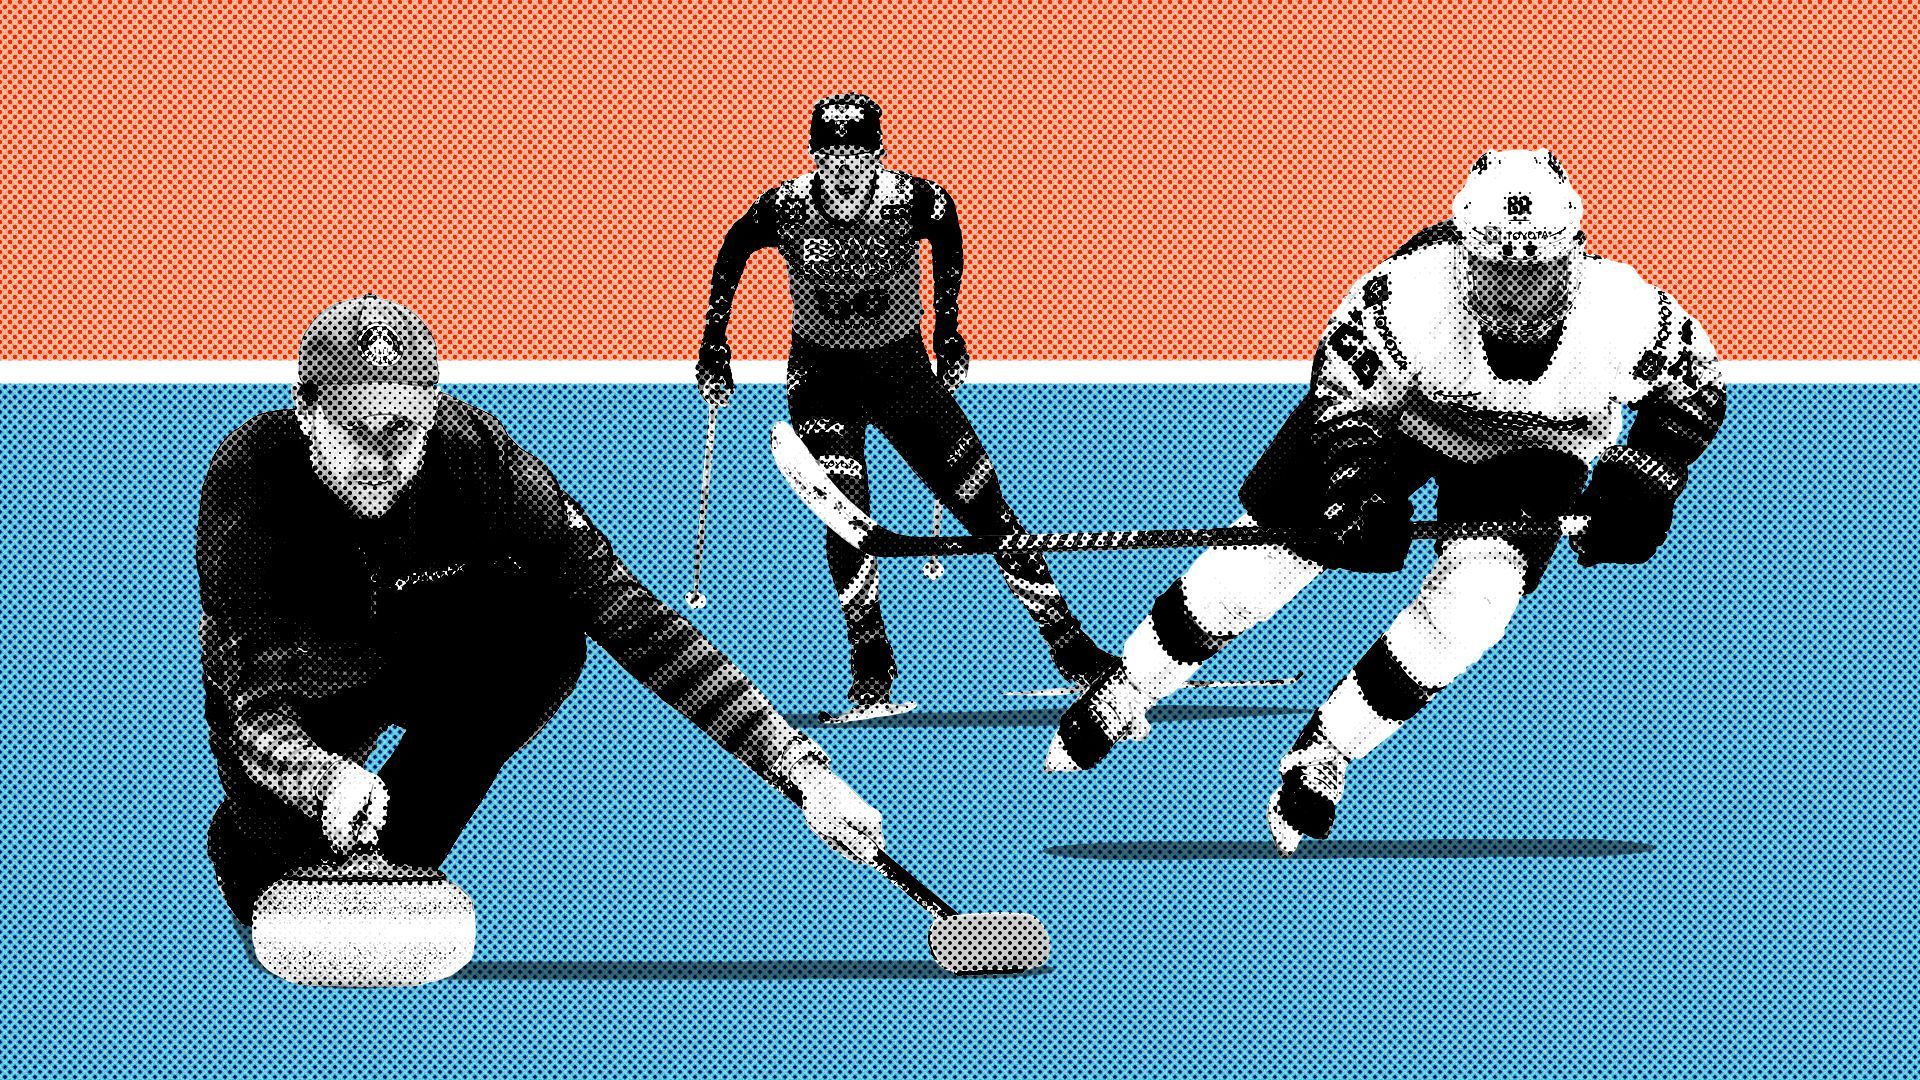 Photo illustration of a collage featuring, from left, curler John Shuster, skier Jessie Diggins and hockey player Hannah Brandt.